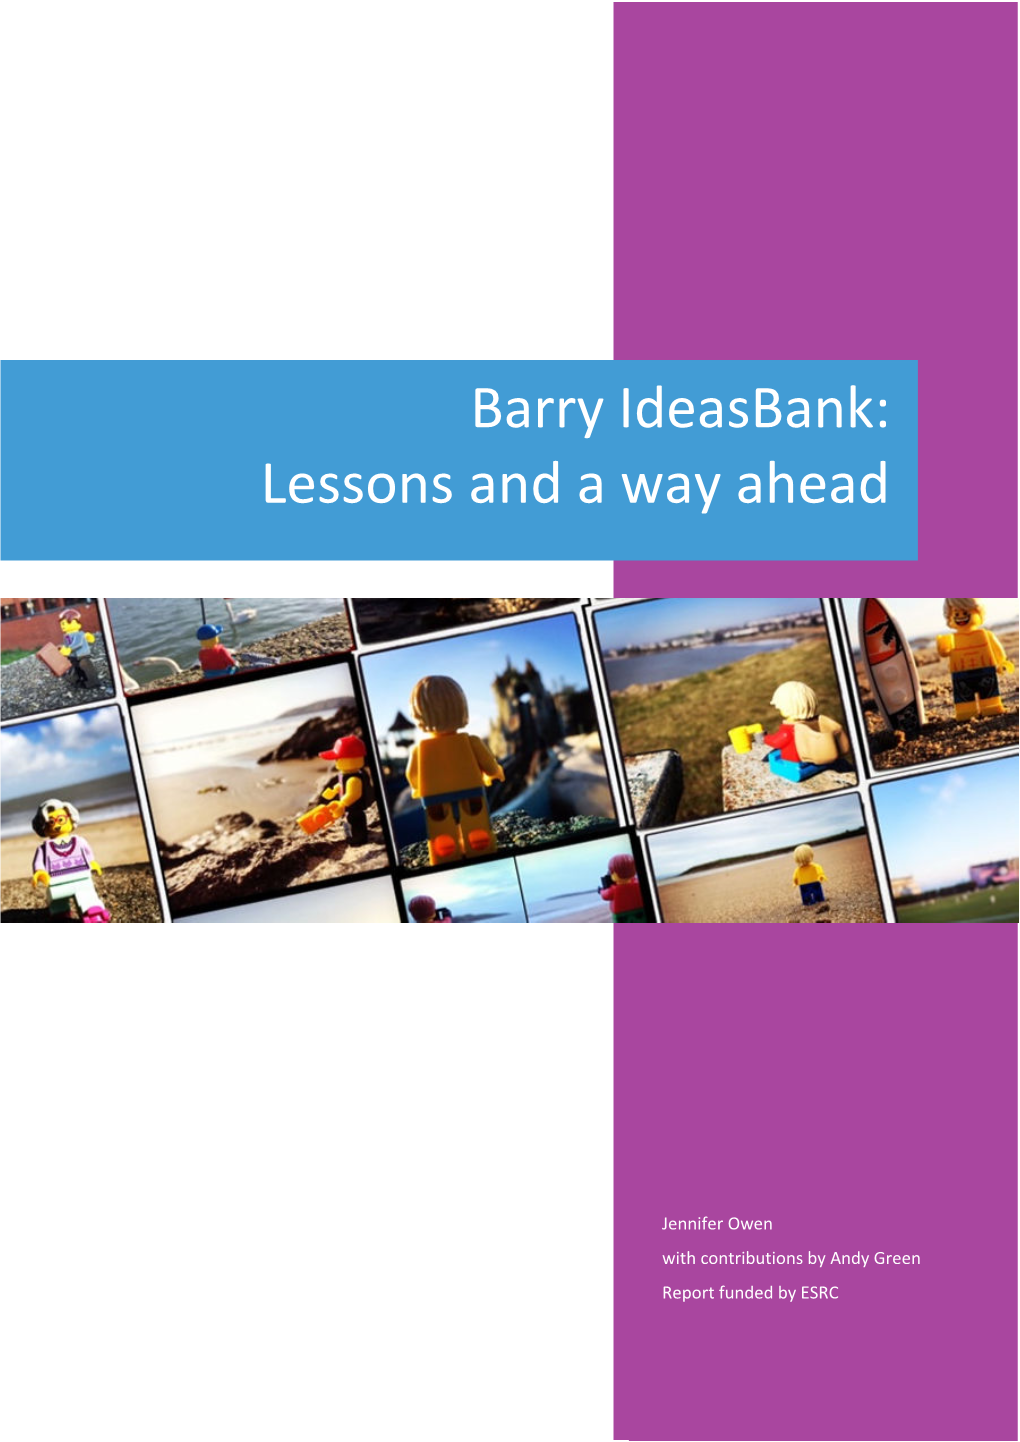 Barry Ideasbank: Lessons and a Way Ahead